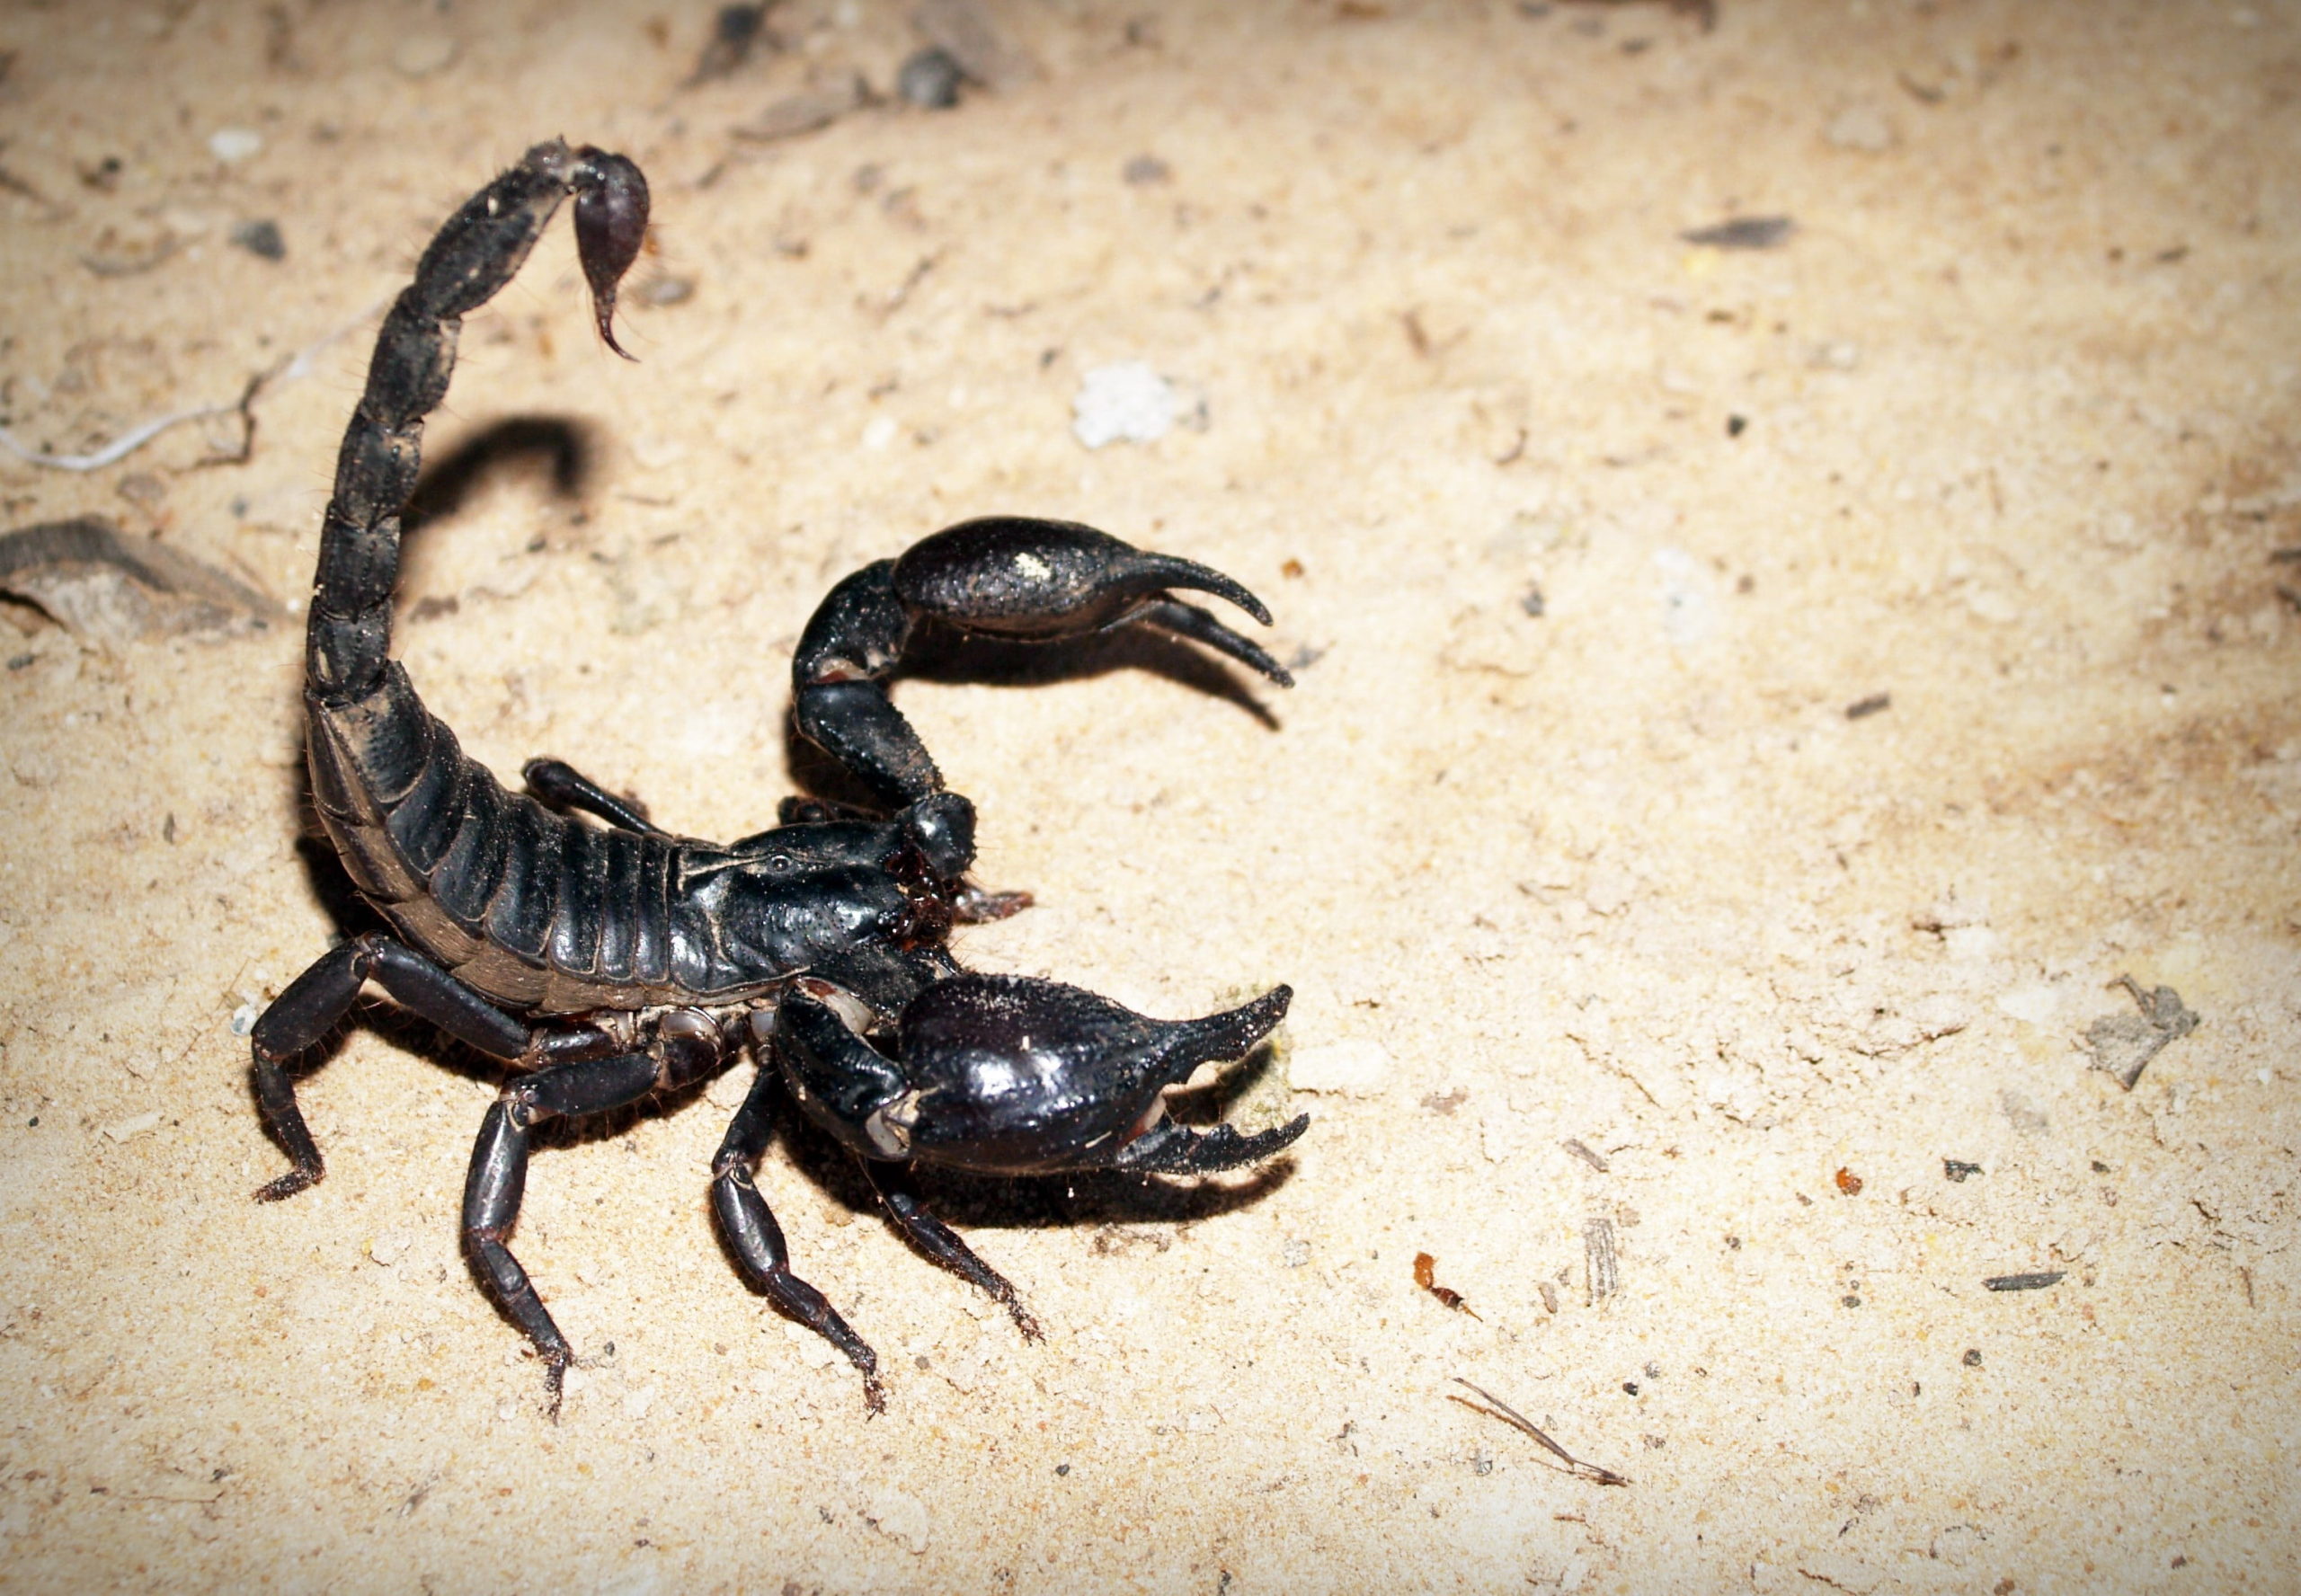 Can Pest Control Get Rid of Scorpions